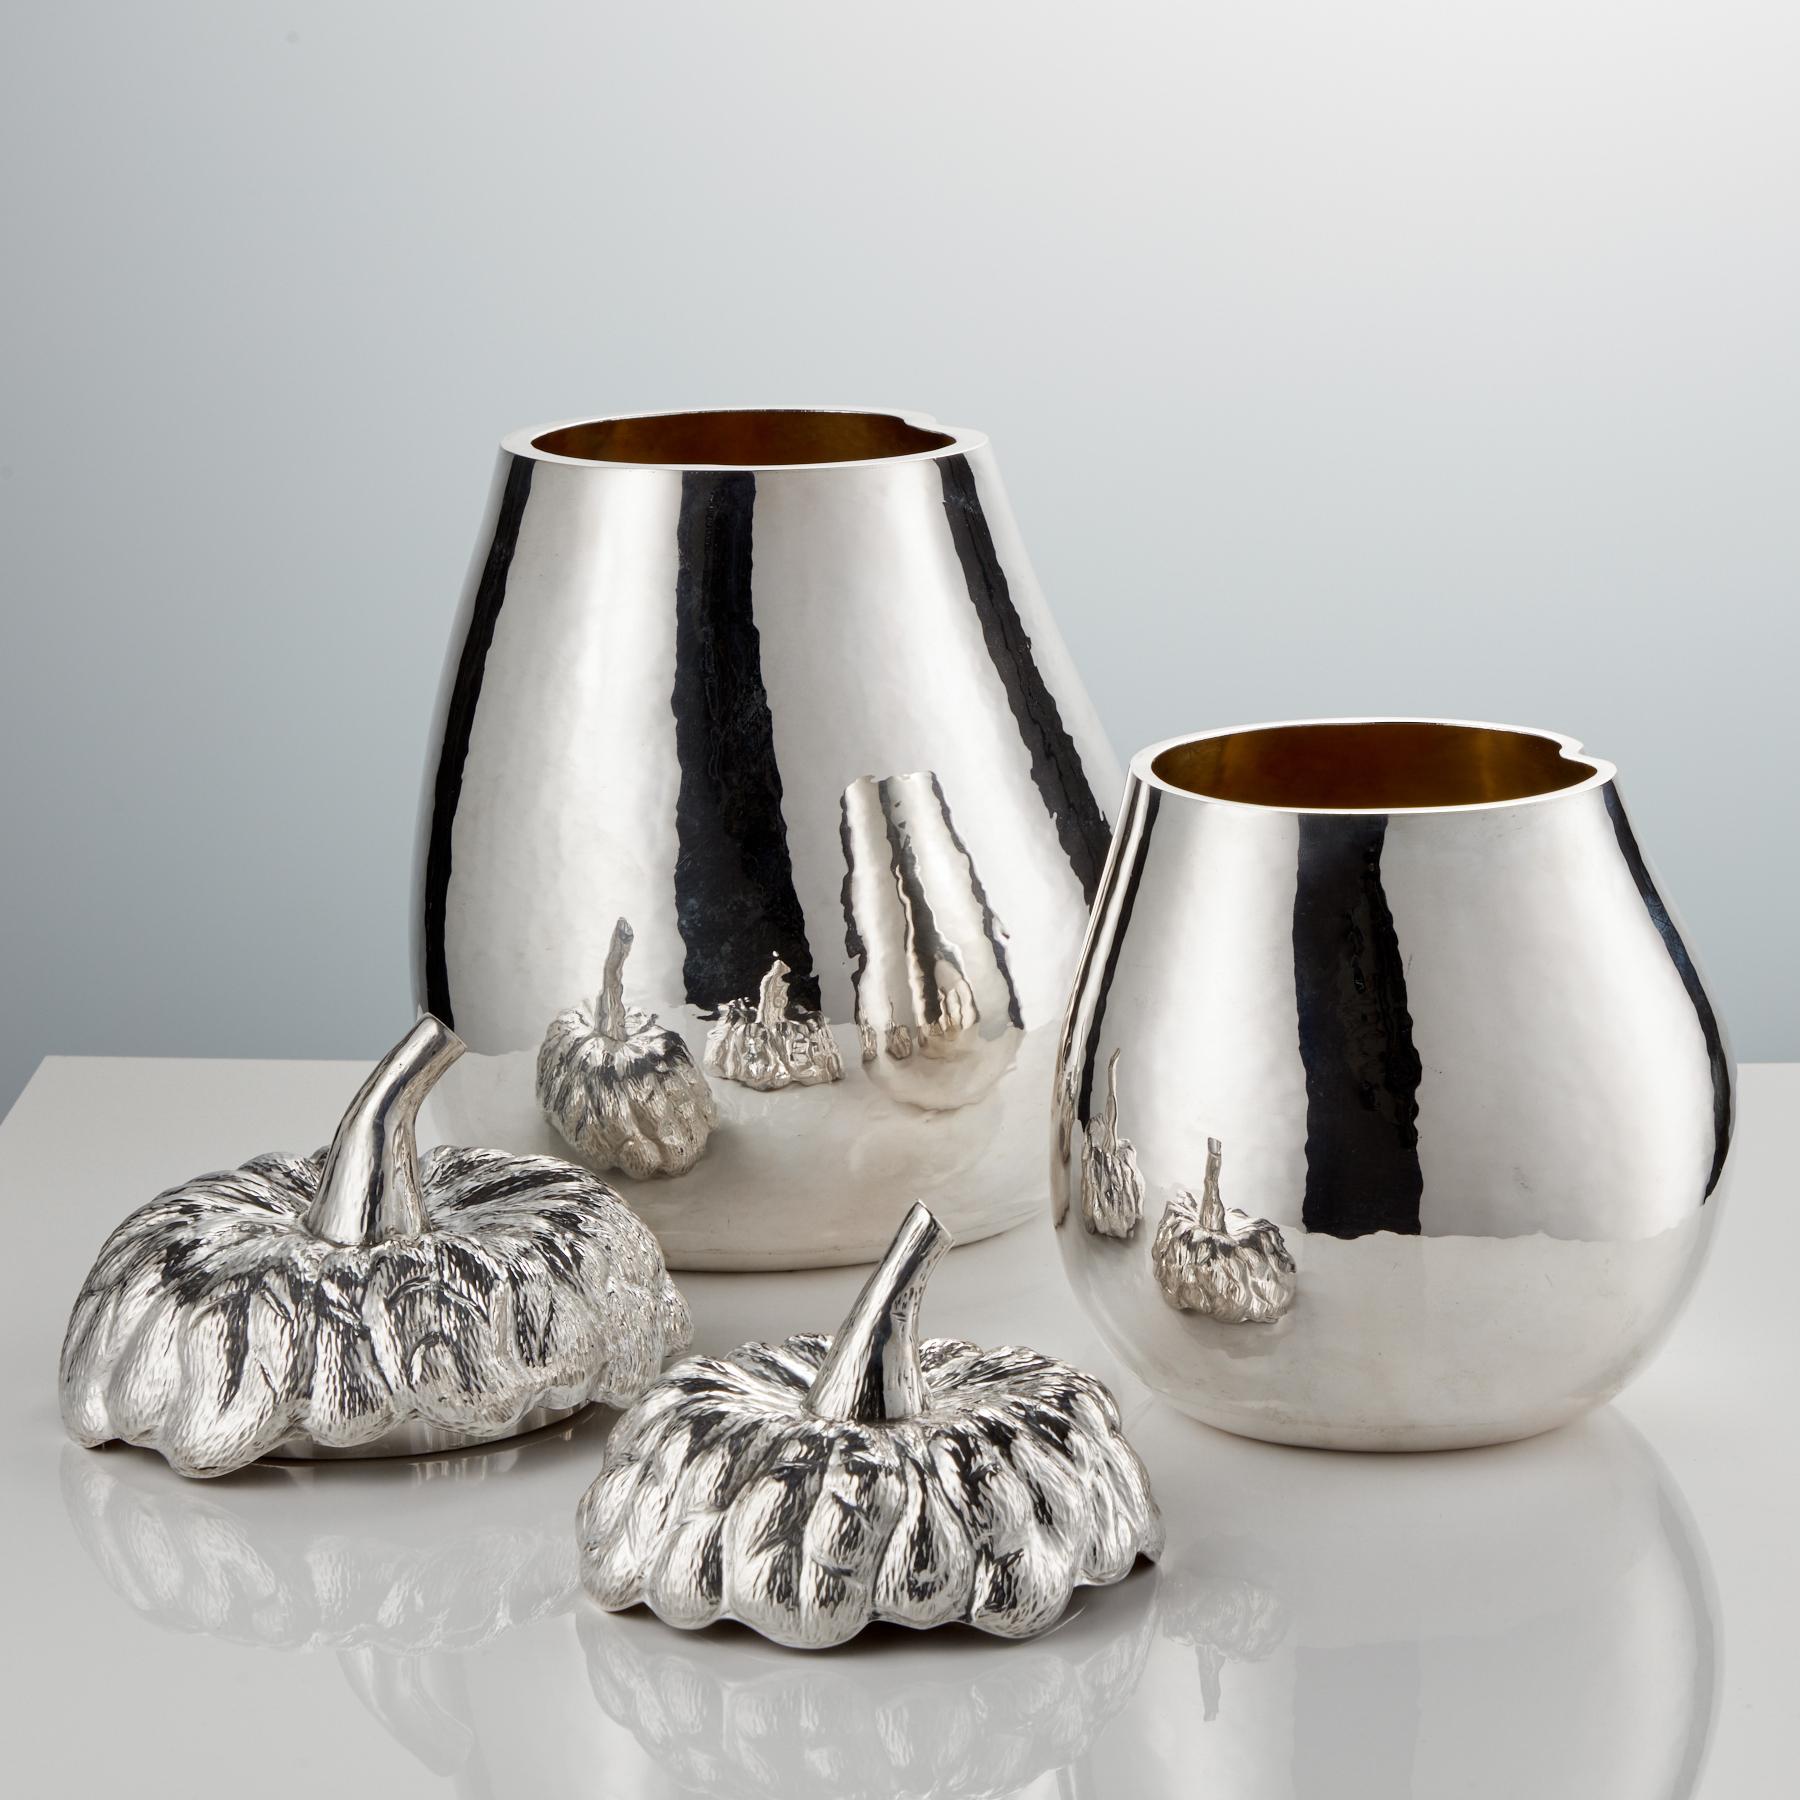 Although not a pair these two quality pieces complement each other perfectly?
All handmade, the gently hammered body and lids are a real mark of quality & they are in excellent condition.
The perfect barware or decorative item.
Origin Italy